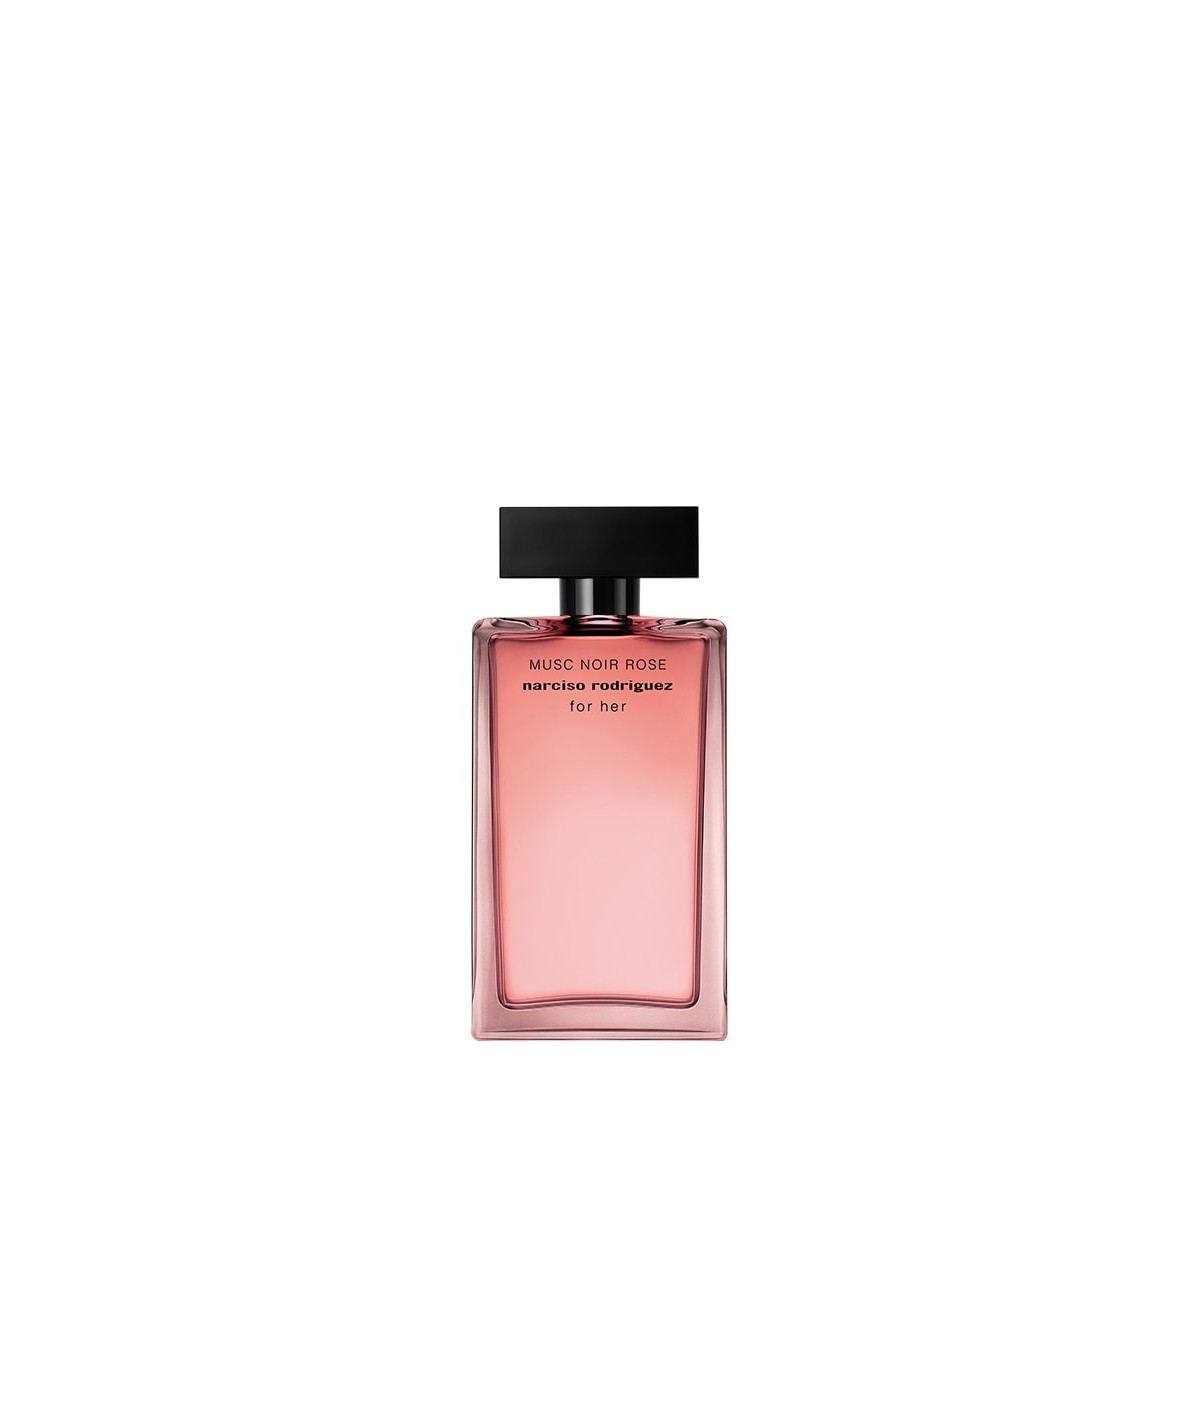 Narciso Rodriguez Musc Noir Rose for her EDP 100 ml. Narciso Rodriguez Rose Musk. Духи Роуз Ноире. Нарциссо Родригес Нуар Роуз Маск отзывы.